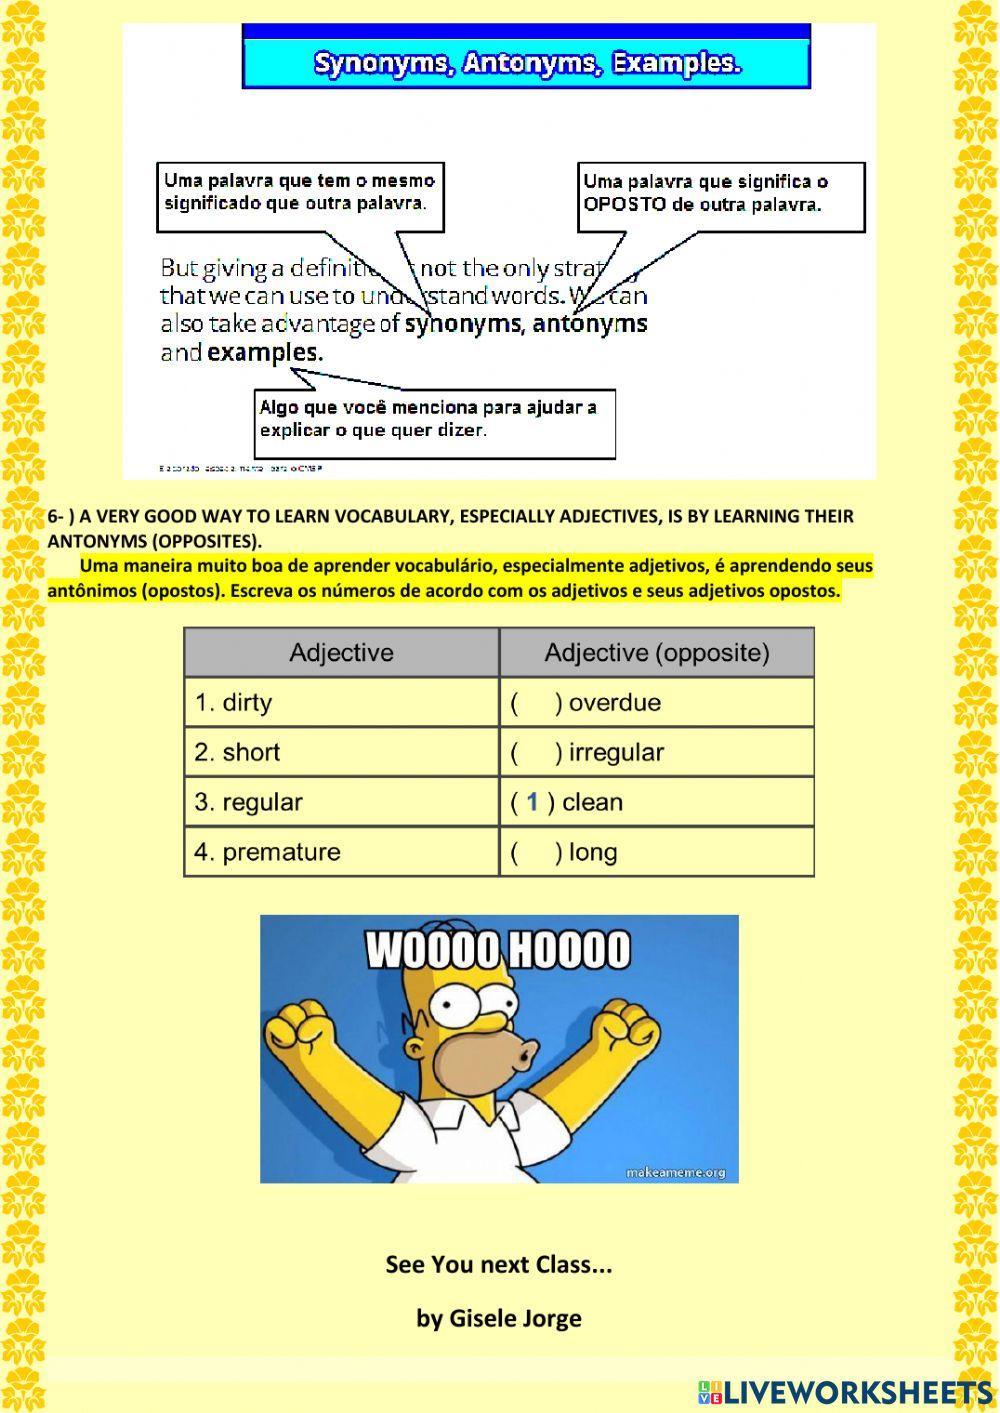 2nd BIMESTER - 2ª ACTIVITY – SYNONYMS, ANTONYMS AND DEFINITIONS - 2nd